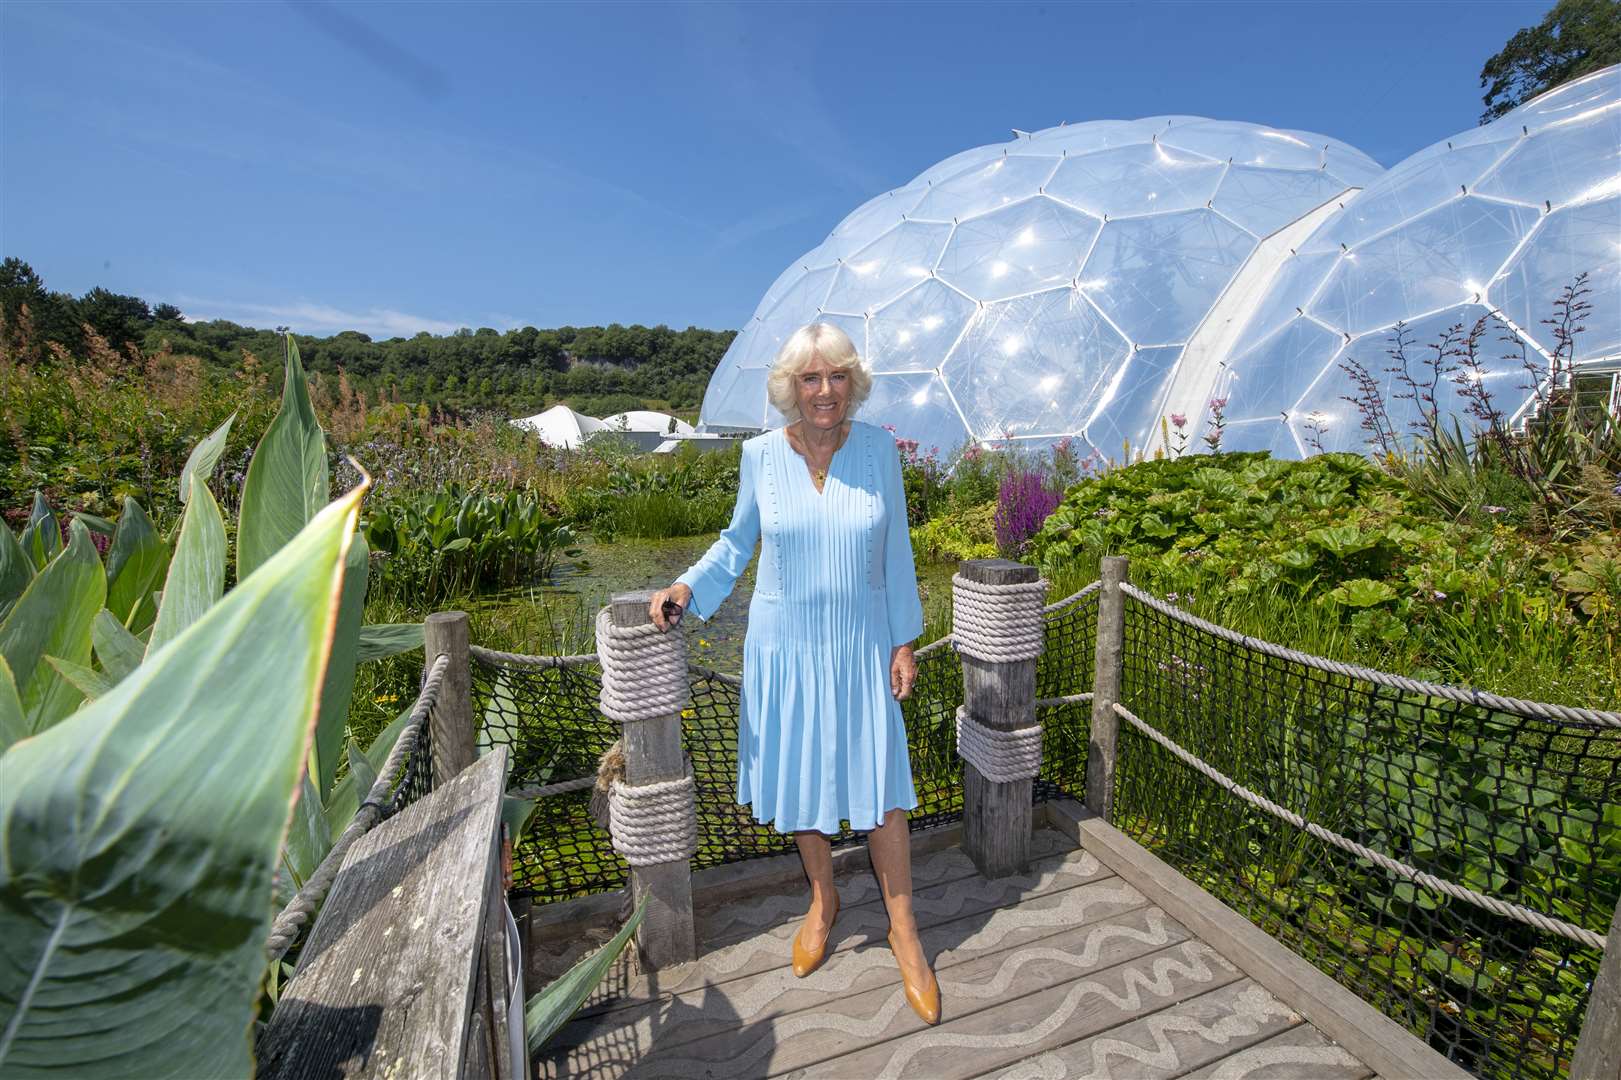 Camilla at the 10th anniversary of The Big Lunch initiative at the Eden Project near St Austell in Cornwall (Arthur Edwards/The Sun/PA)